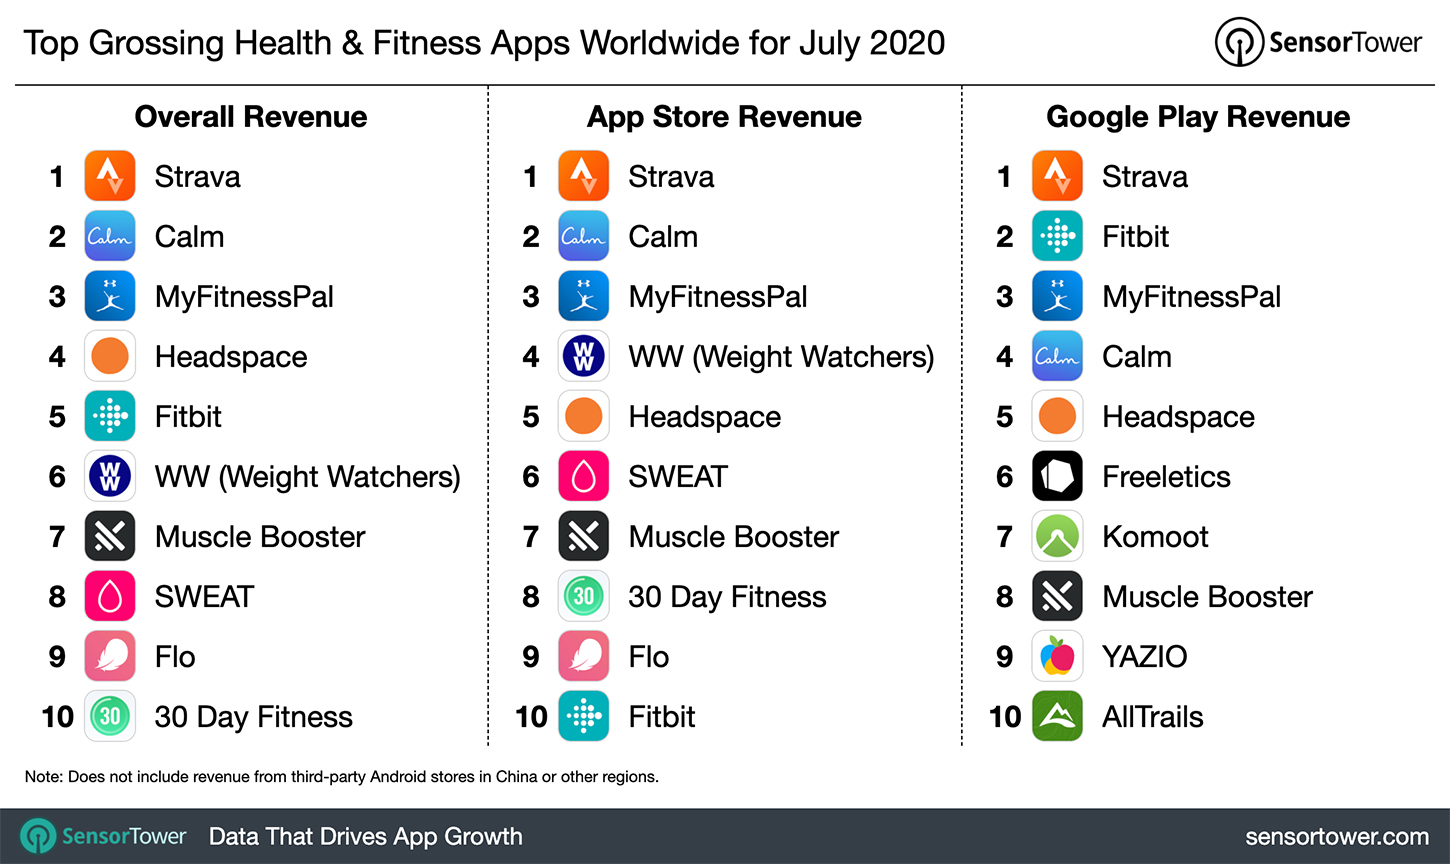 top-grossing-health-and-fitness-apps-worldwide-july-2020.jpg